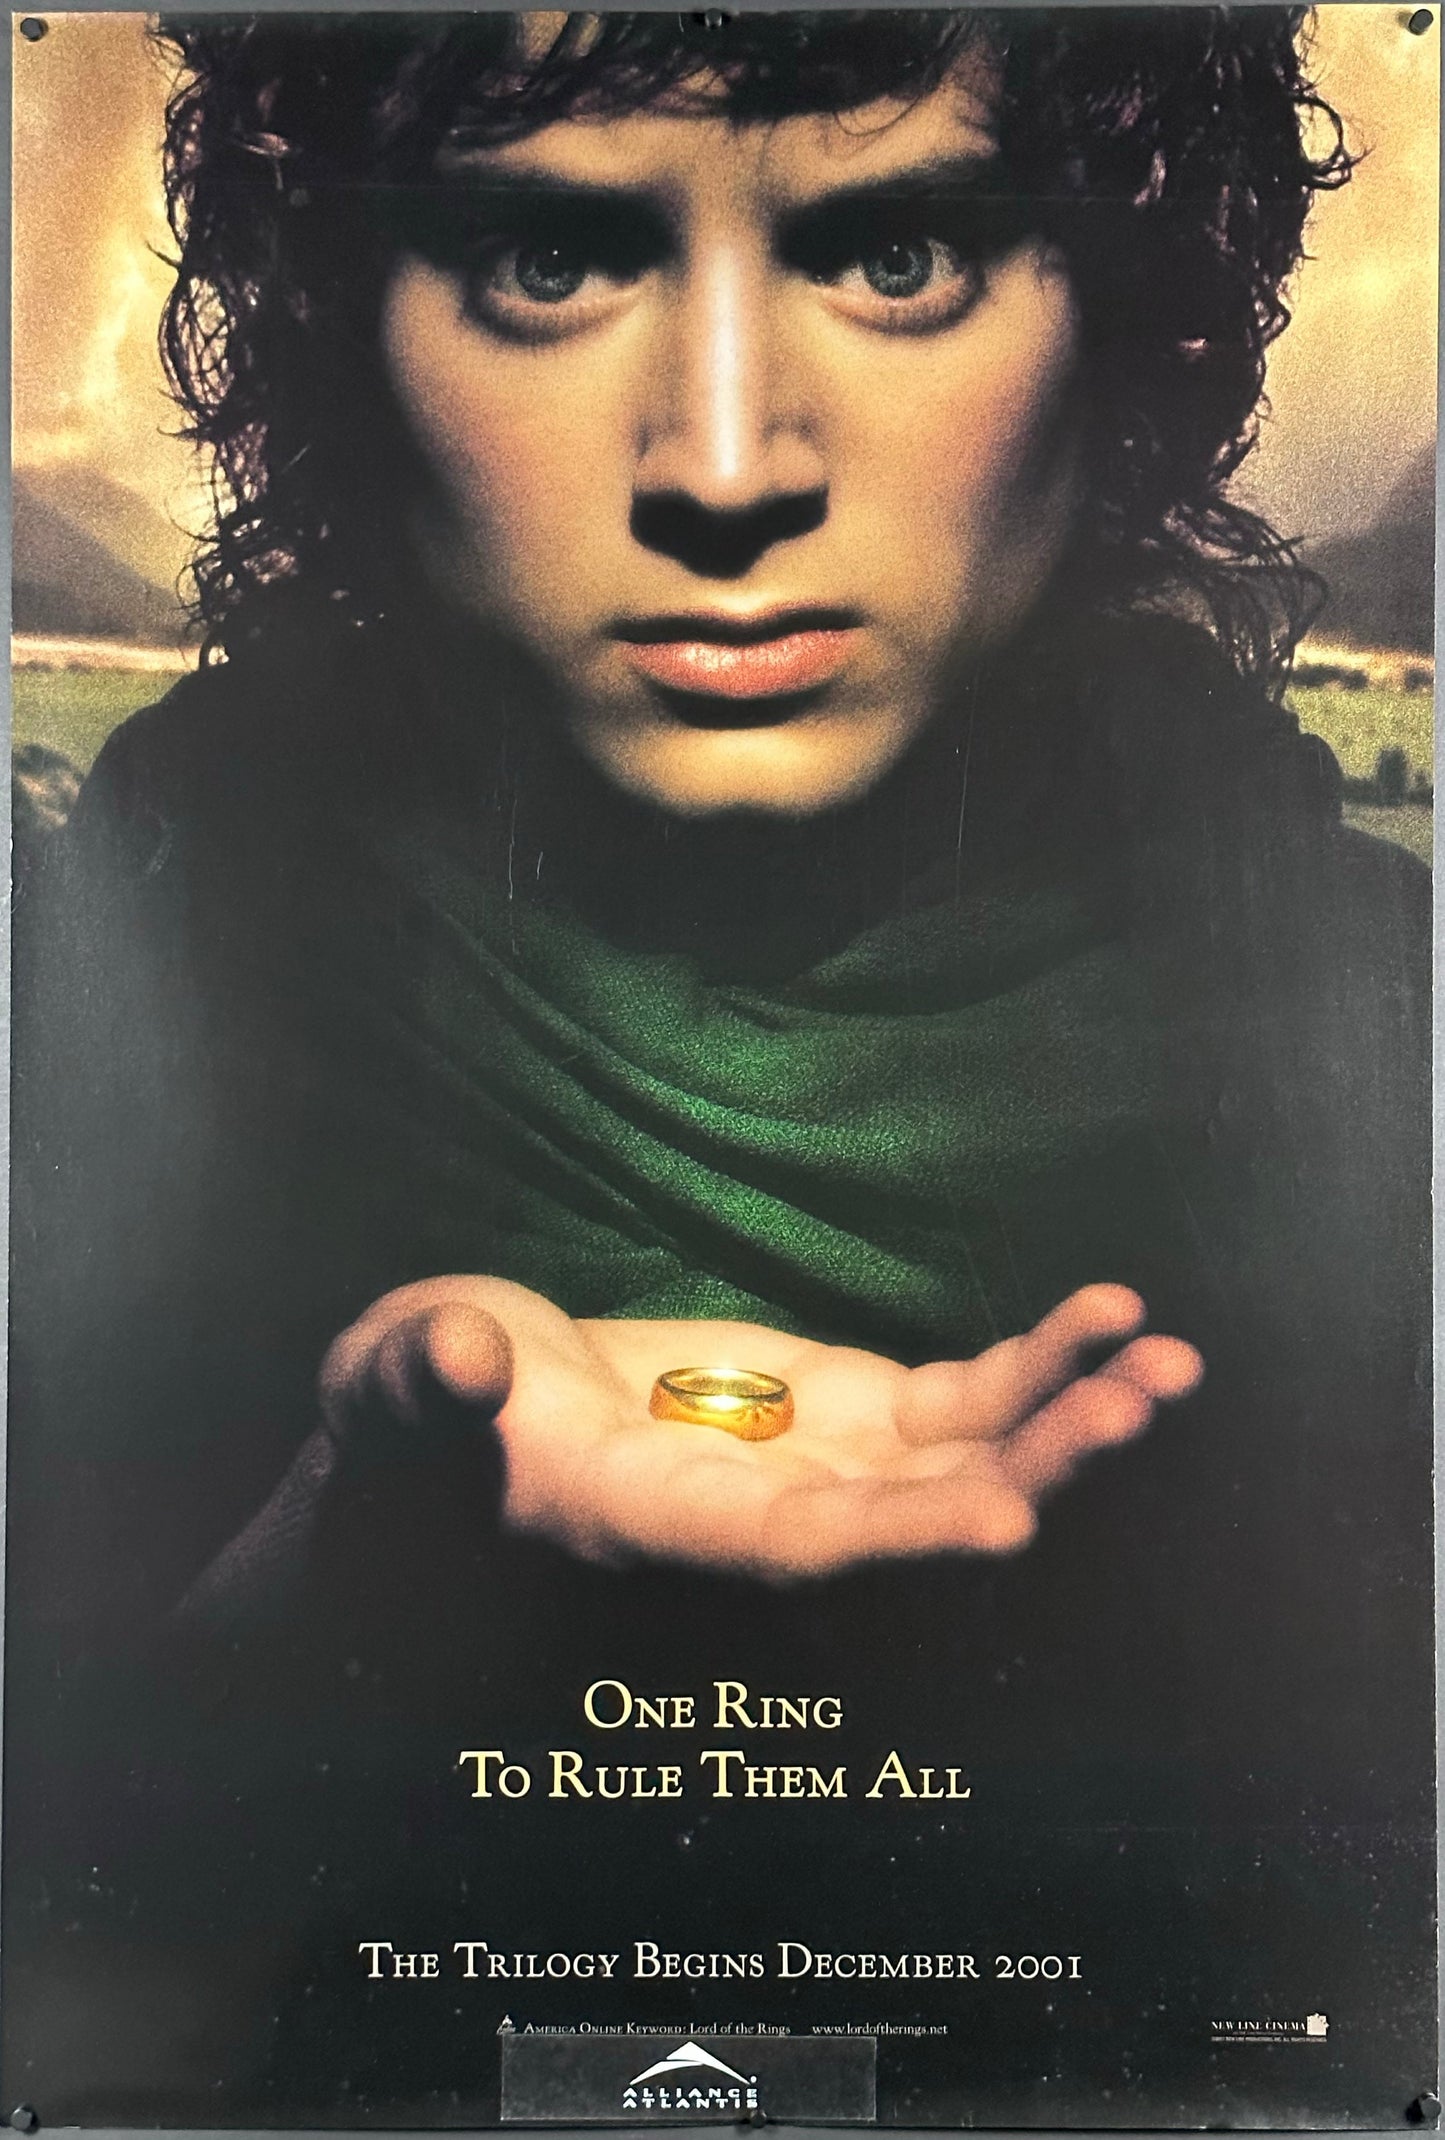 The Lord Of The Rings: The Fellowship Of The Ring US One Sheet "One Ring" Teaser Style (2001) - ORIGINAL RELEASE - posterpalace.com